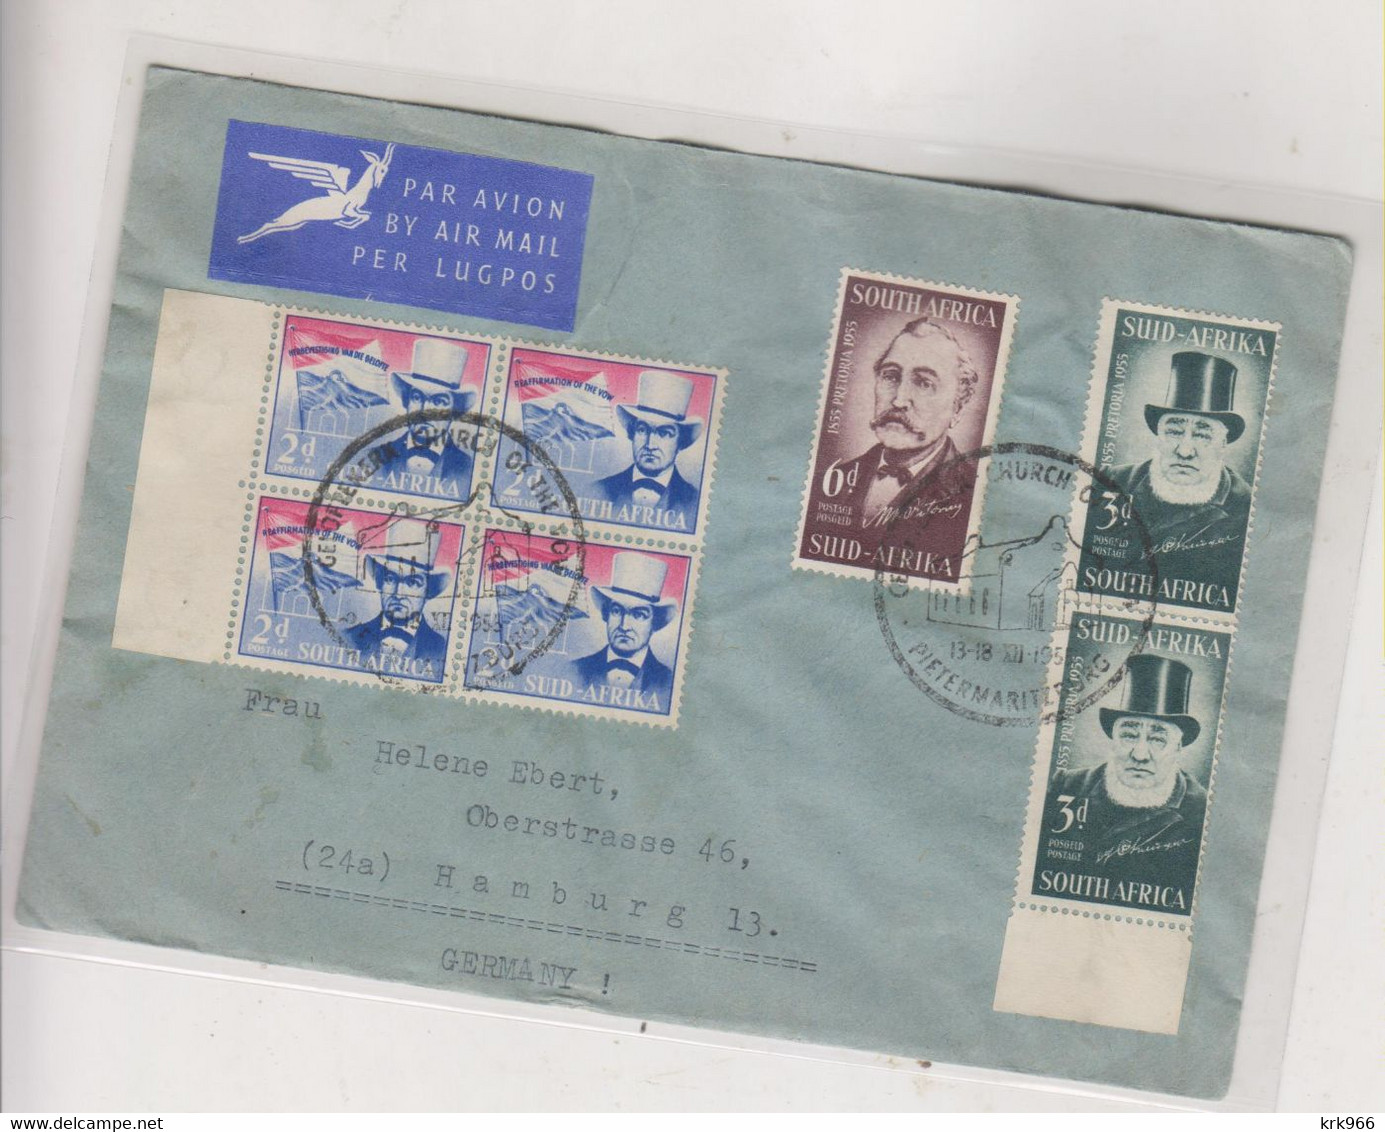 SOUTH AFRICA 1955 Pietermaritzburg Nice Airmail Cover To Germany - Airmail